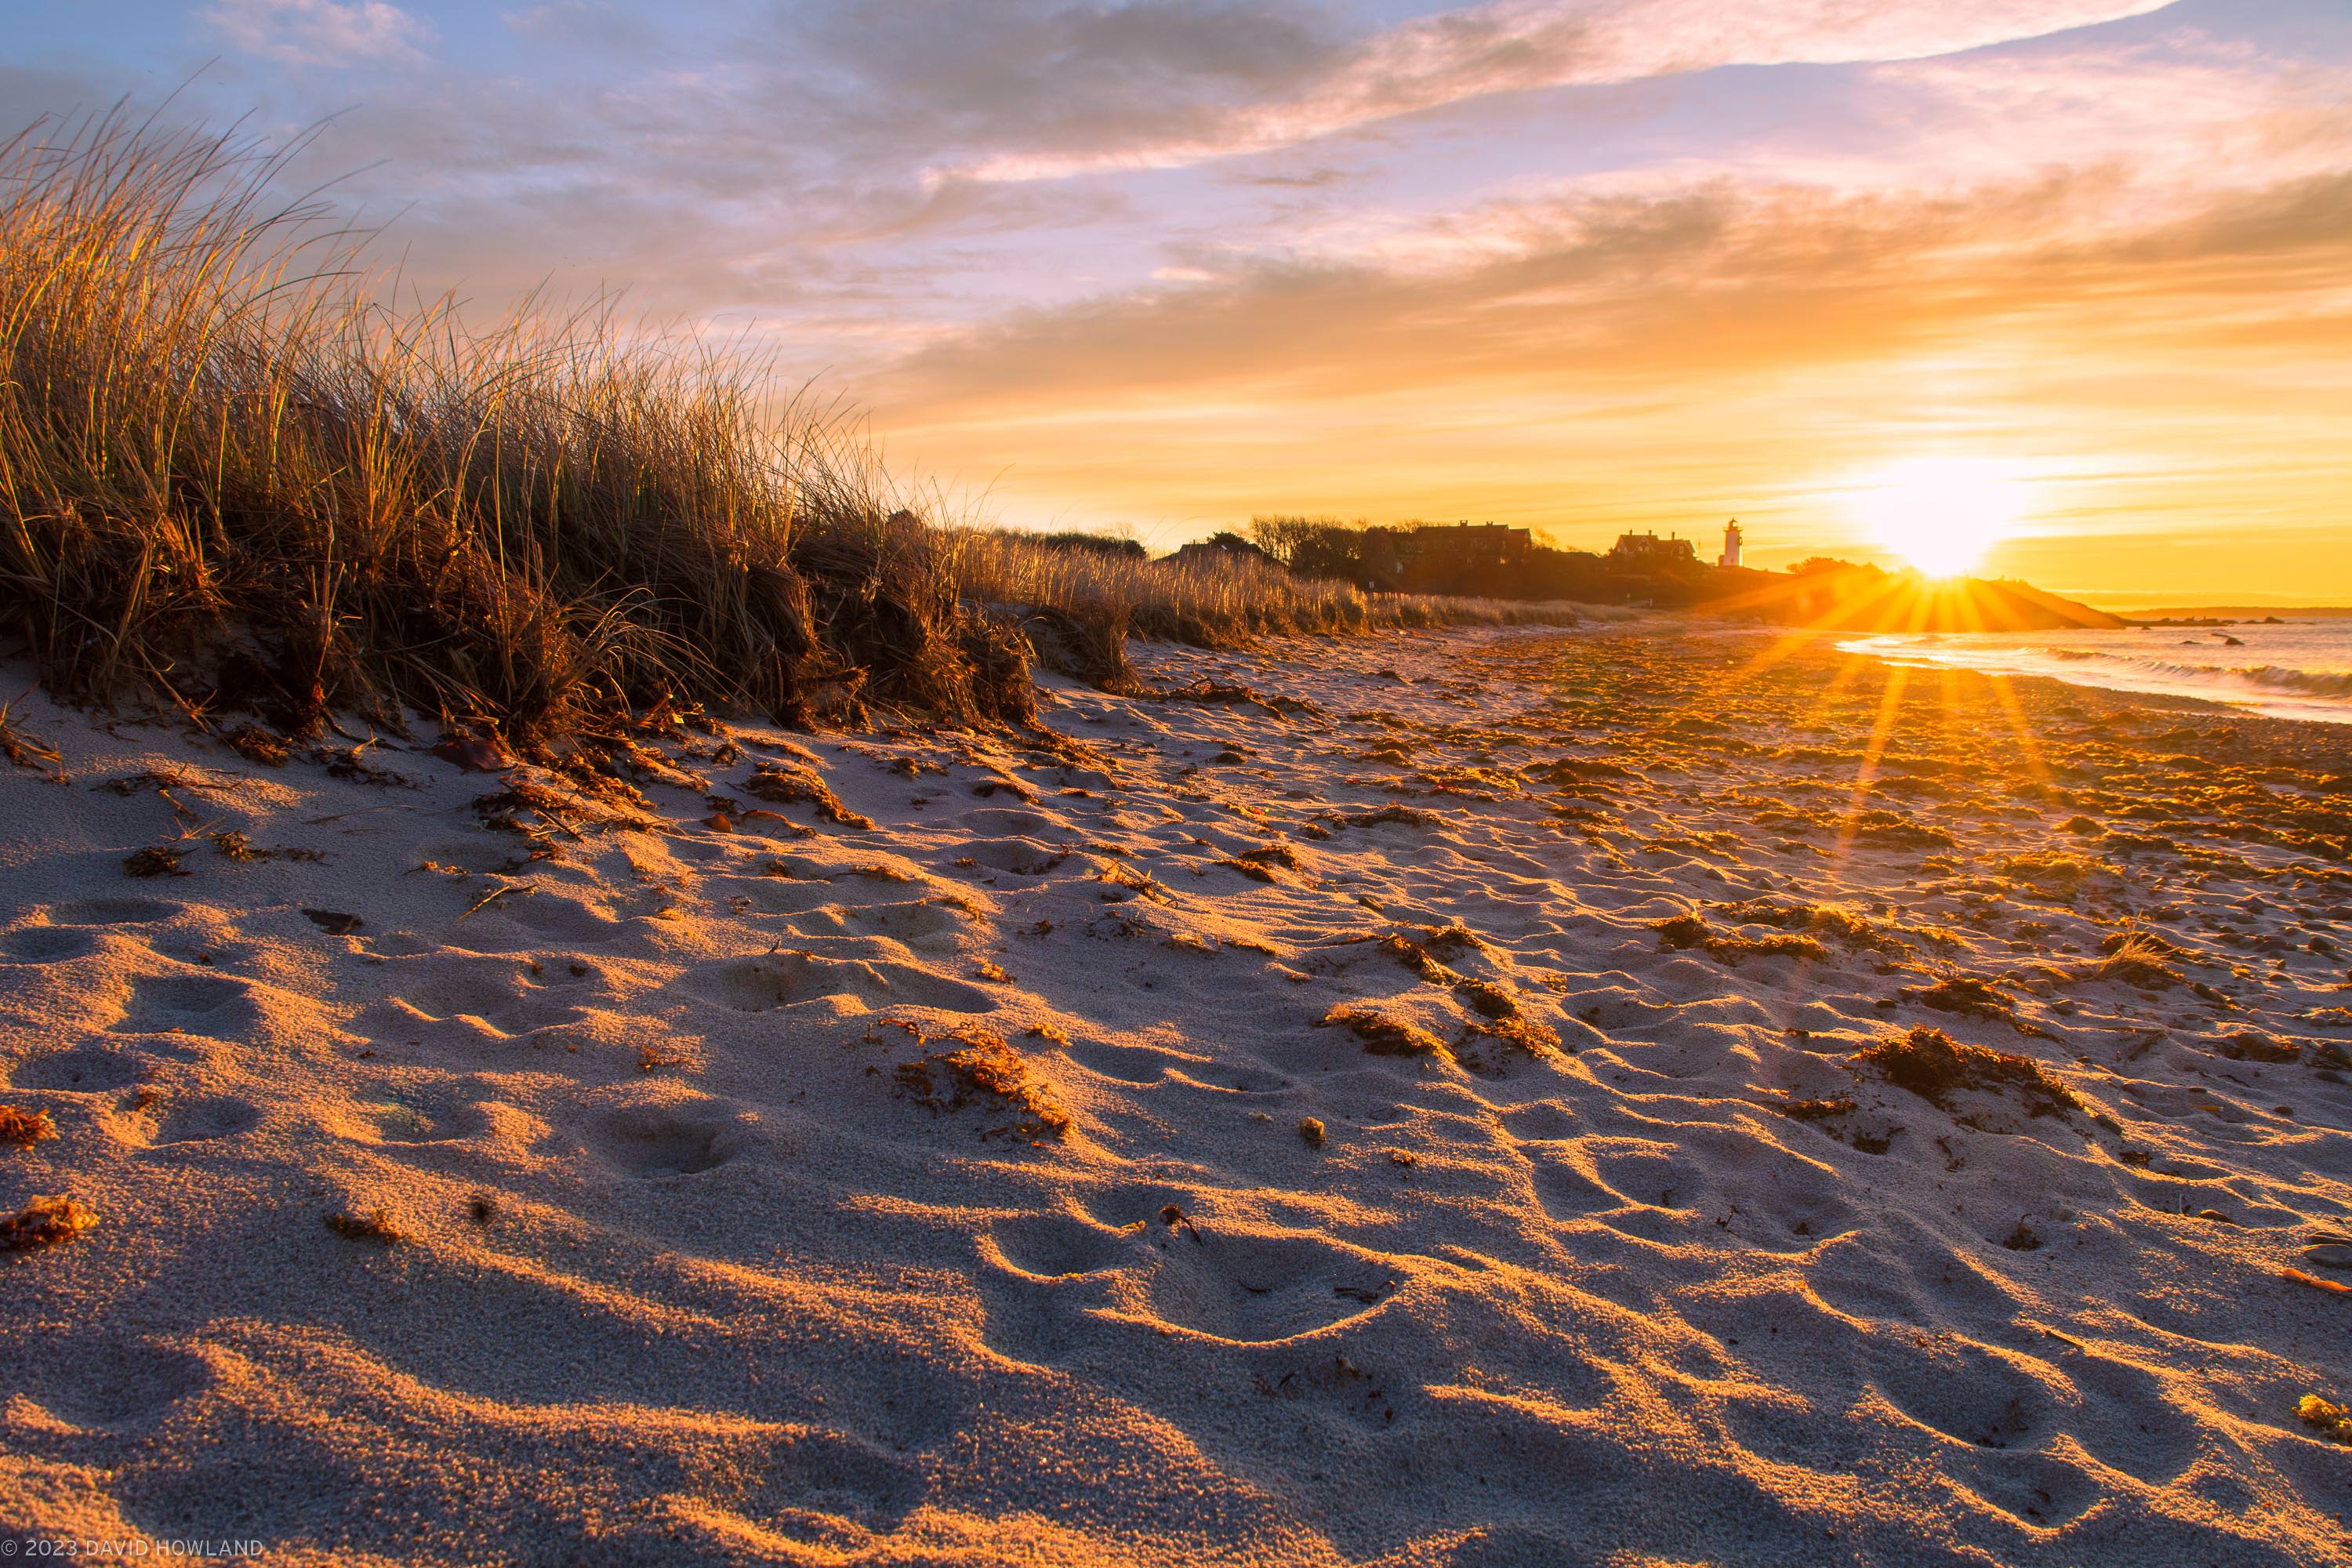 A photo of the sun rising behind Nobska Lighthouse and the sand and beach grass of Nobska Beach in Woods Hole, Massachusetts on Cape Cod.